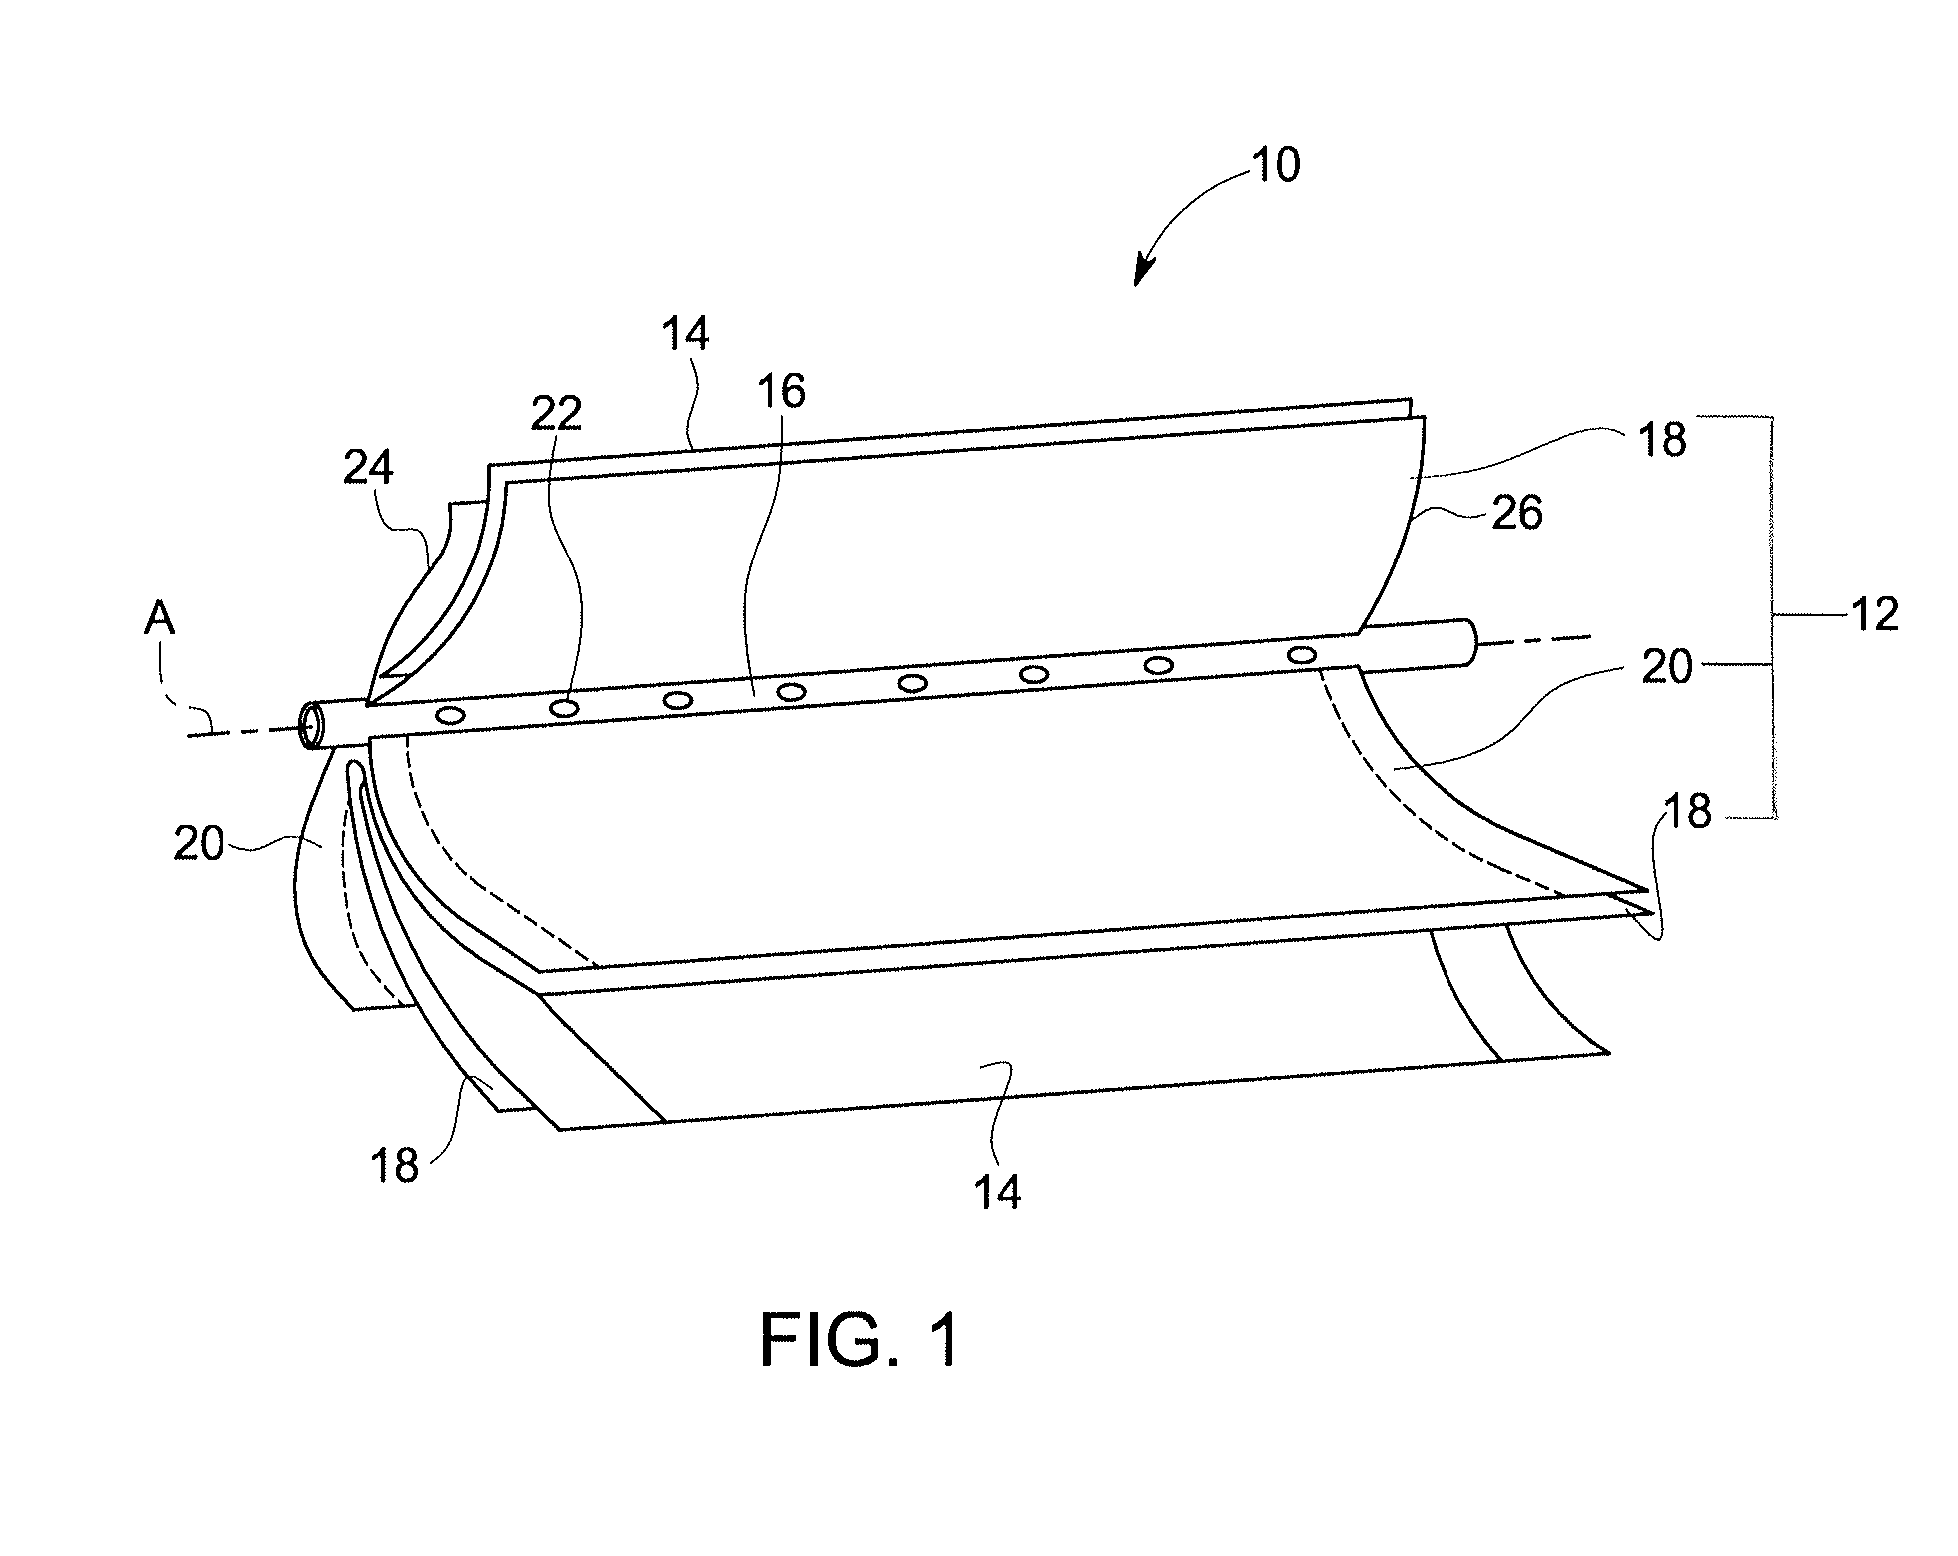 Material efficiency and fabrication of membrane elements